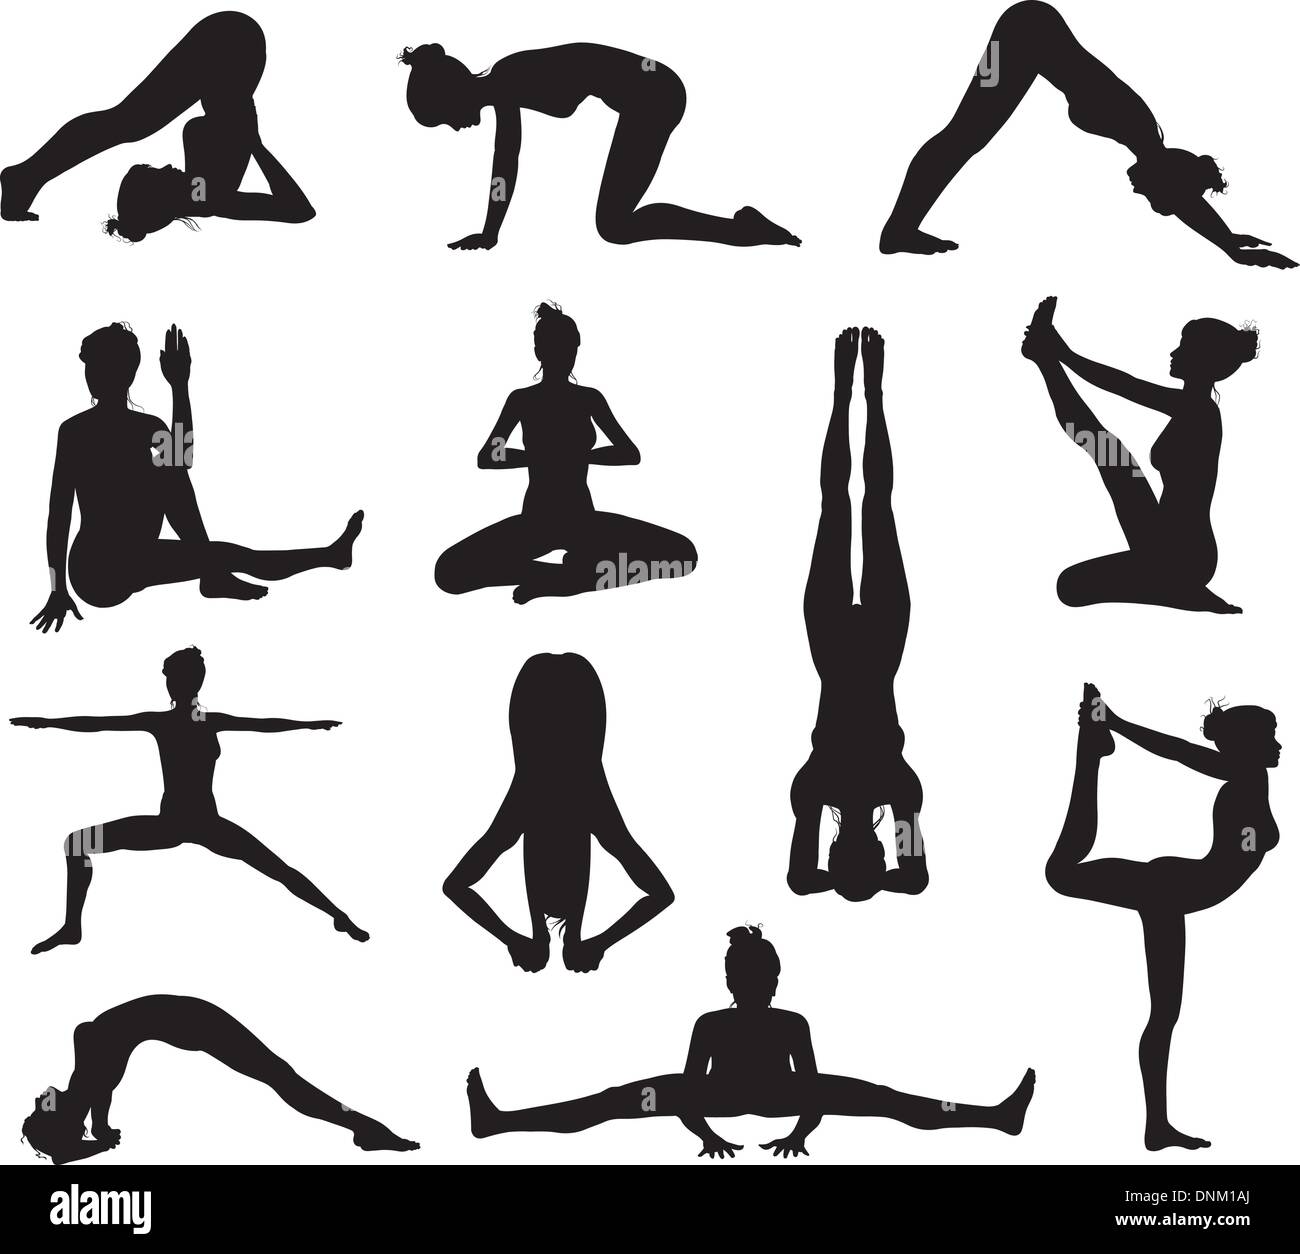 A set of highly detailed high quality yoga or pilates pose silhouettes Stock Vector